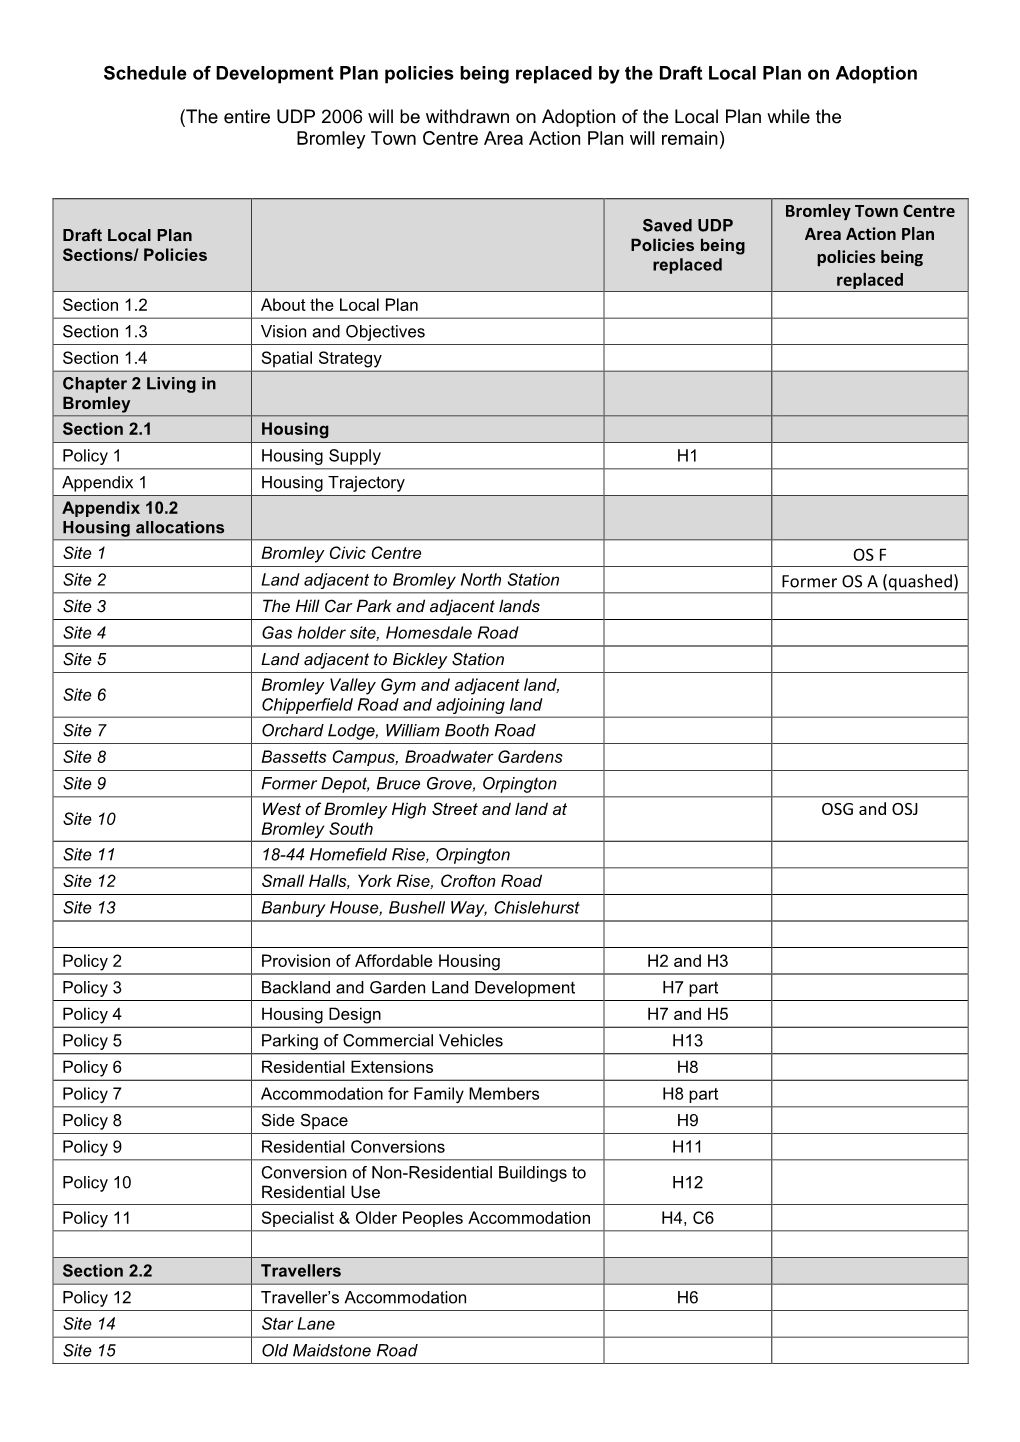 Schedule of Development Plan Policies Being Replaced by the Draft Local Plan on Adoption